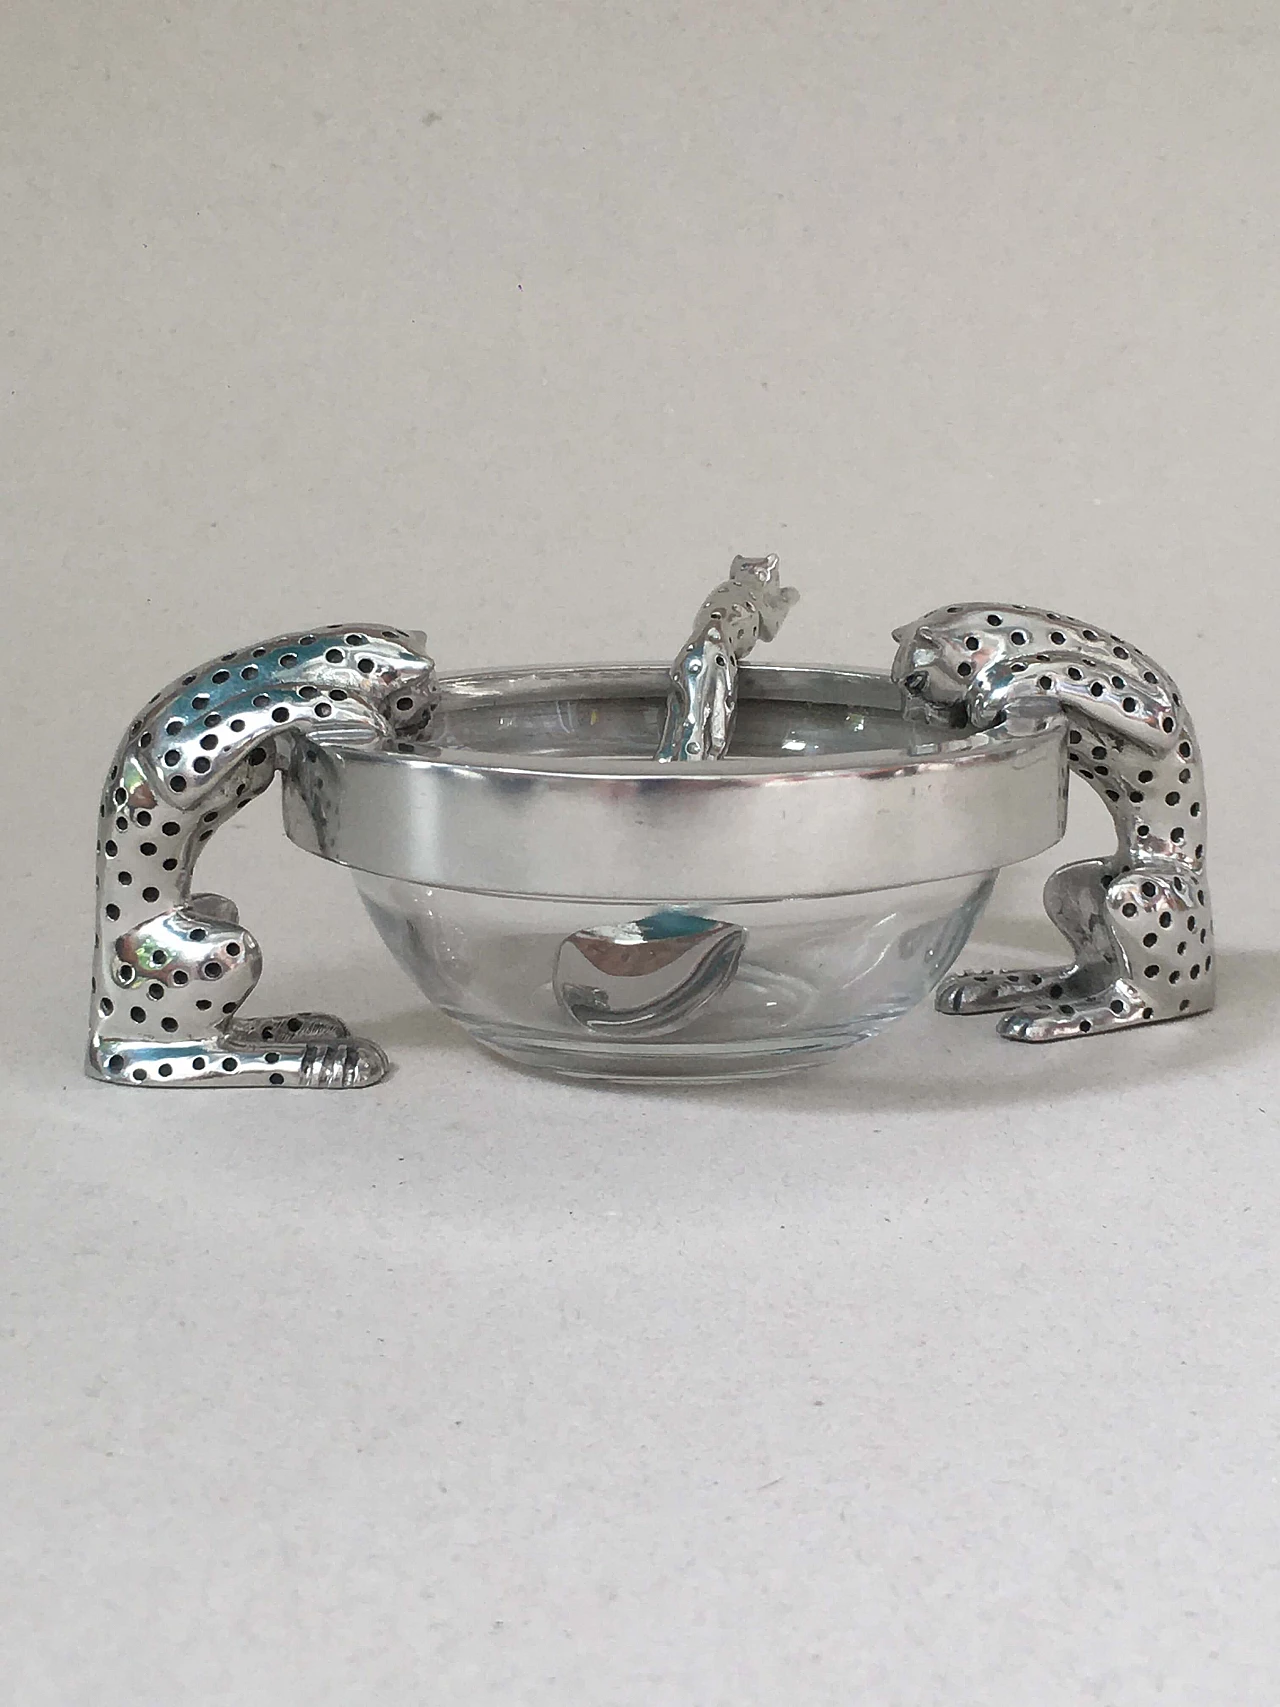 Glass and metal bowl and spoon with cheetahs 1